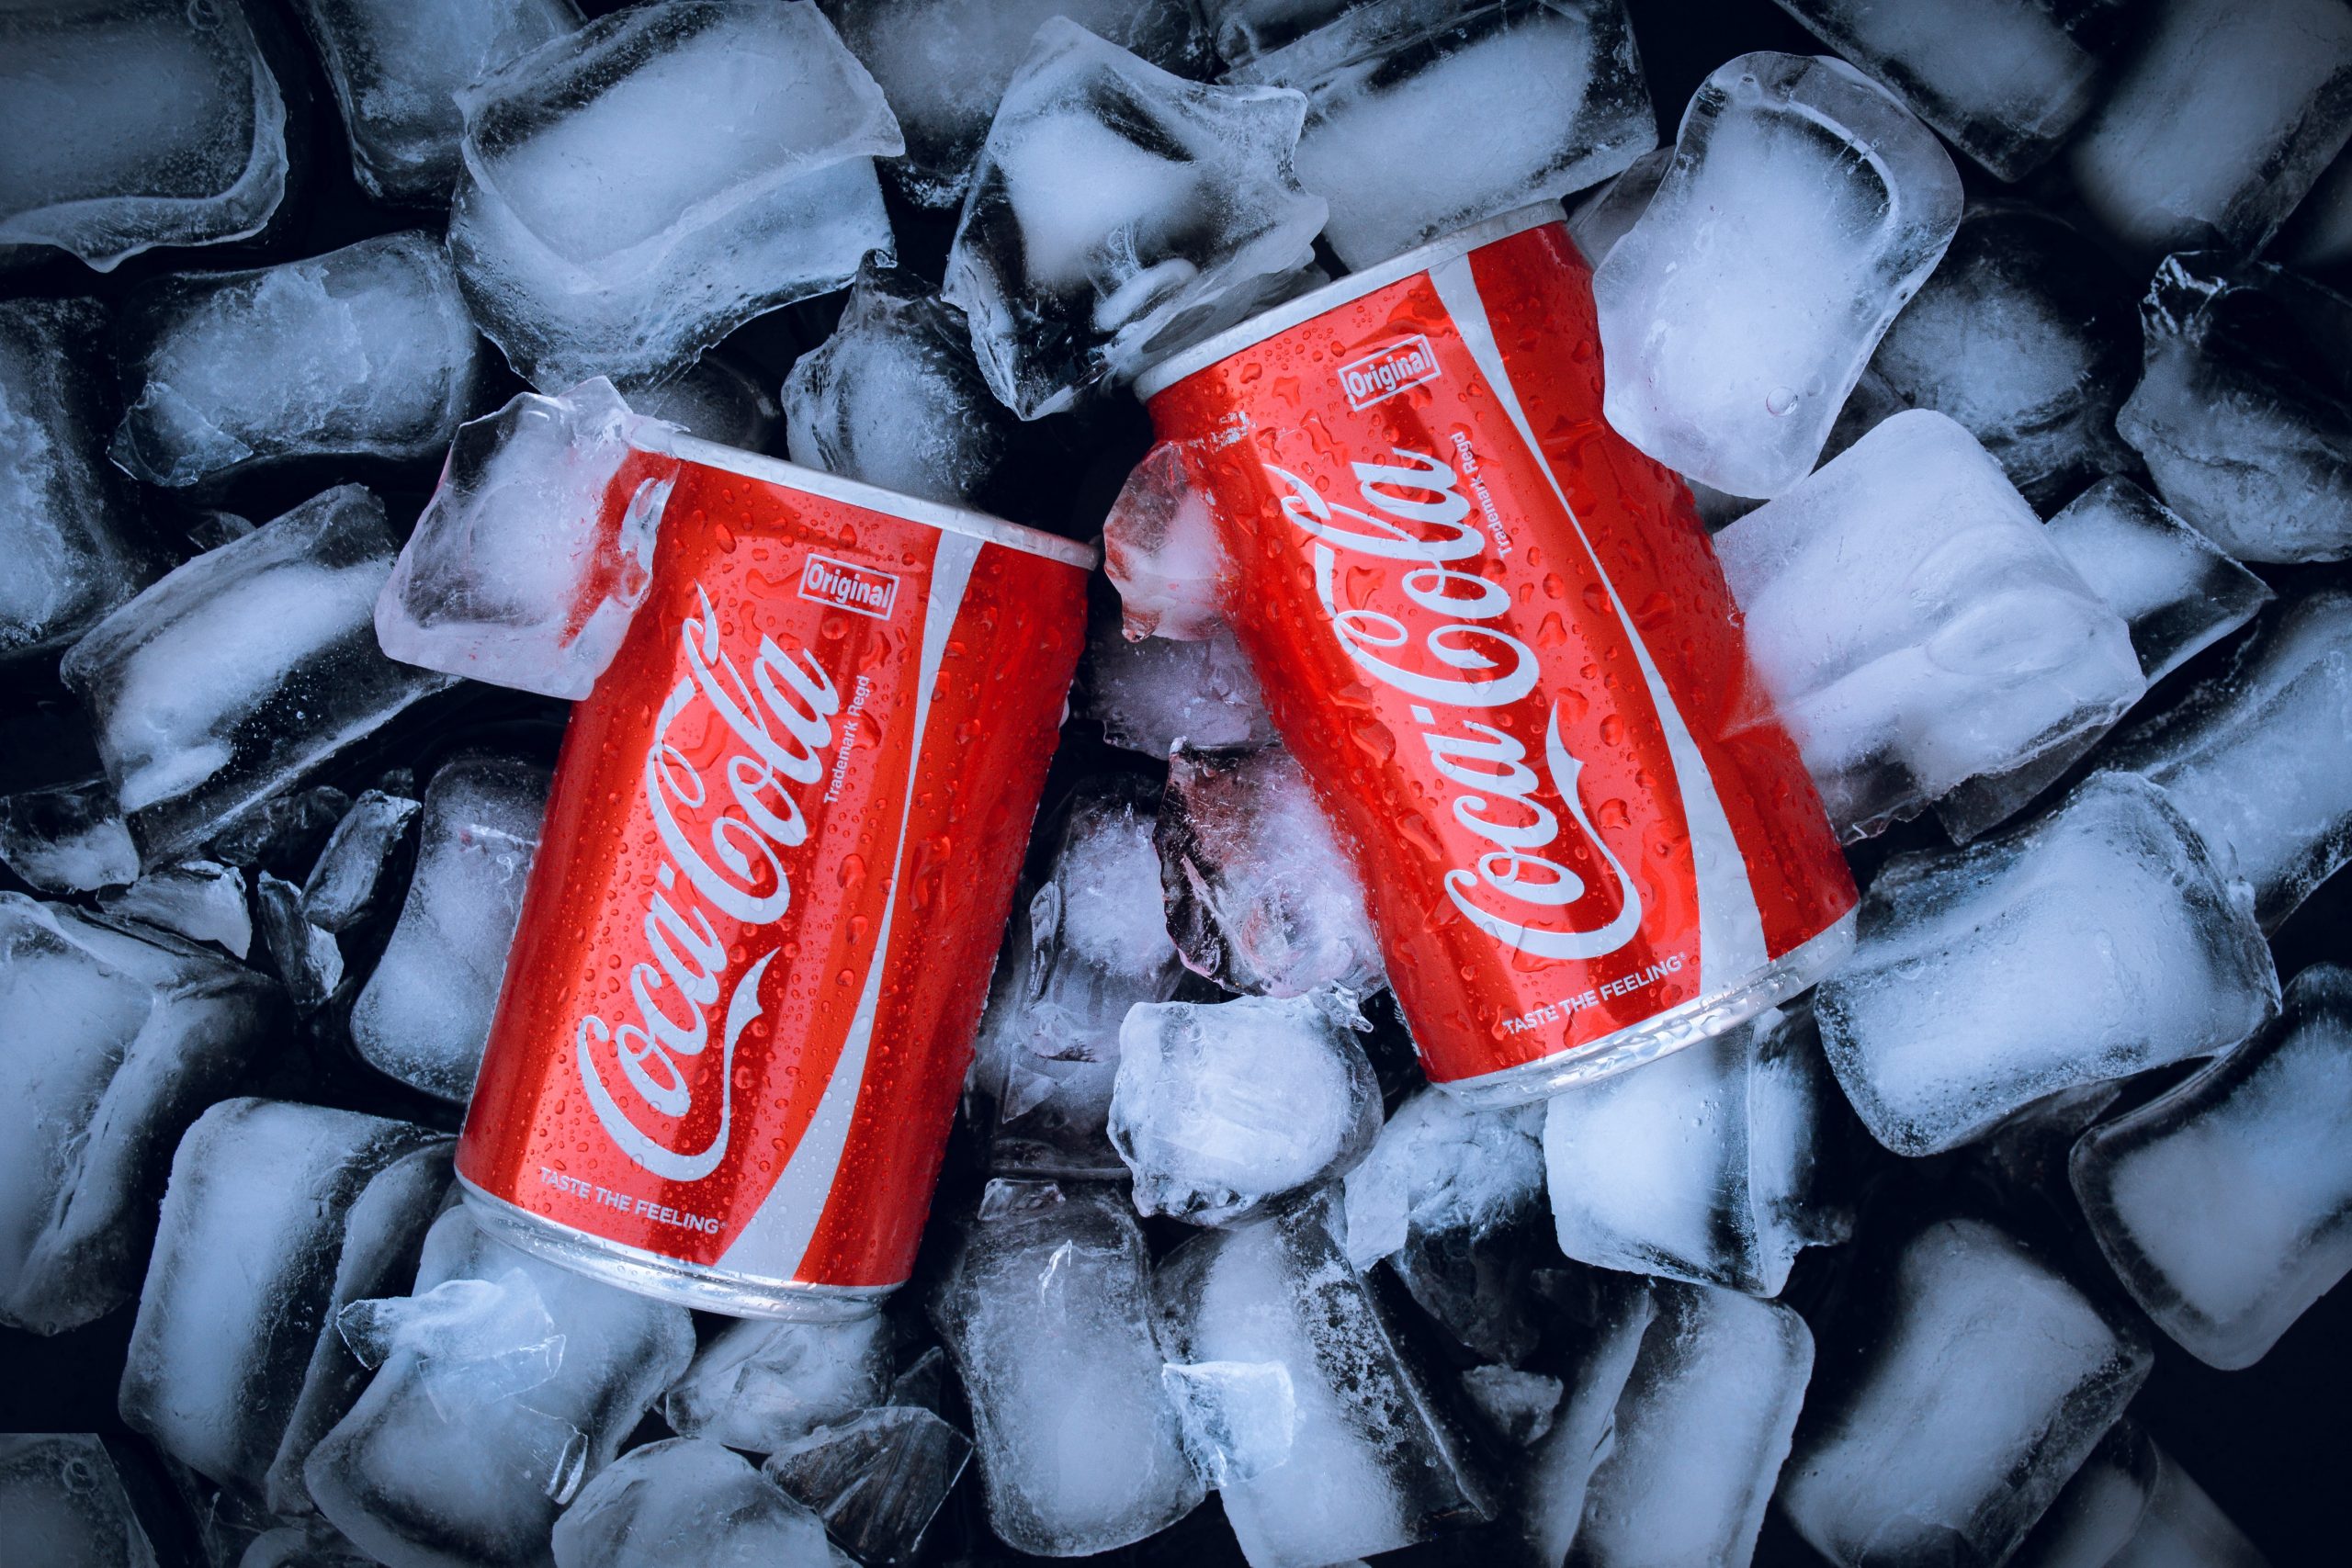 2 cans of coke on ice